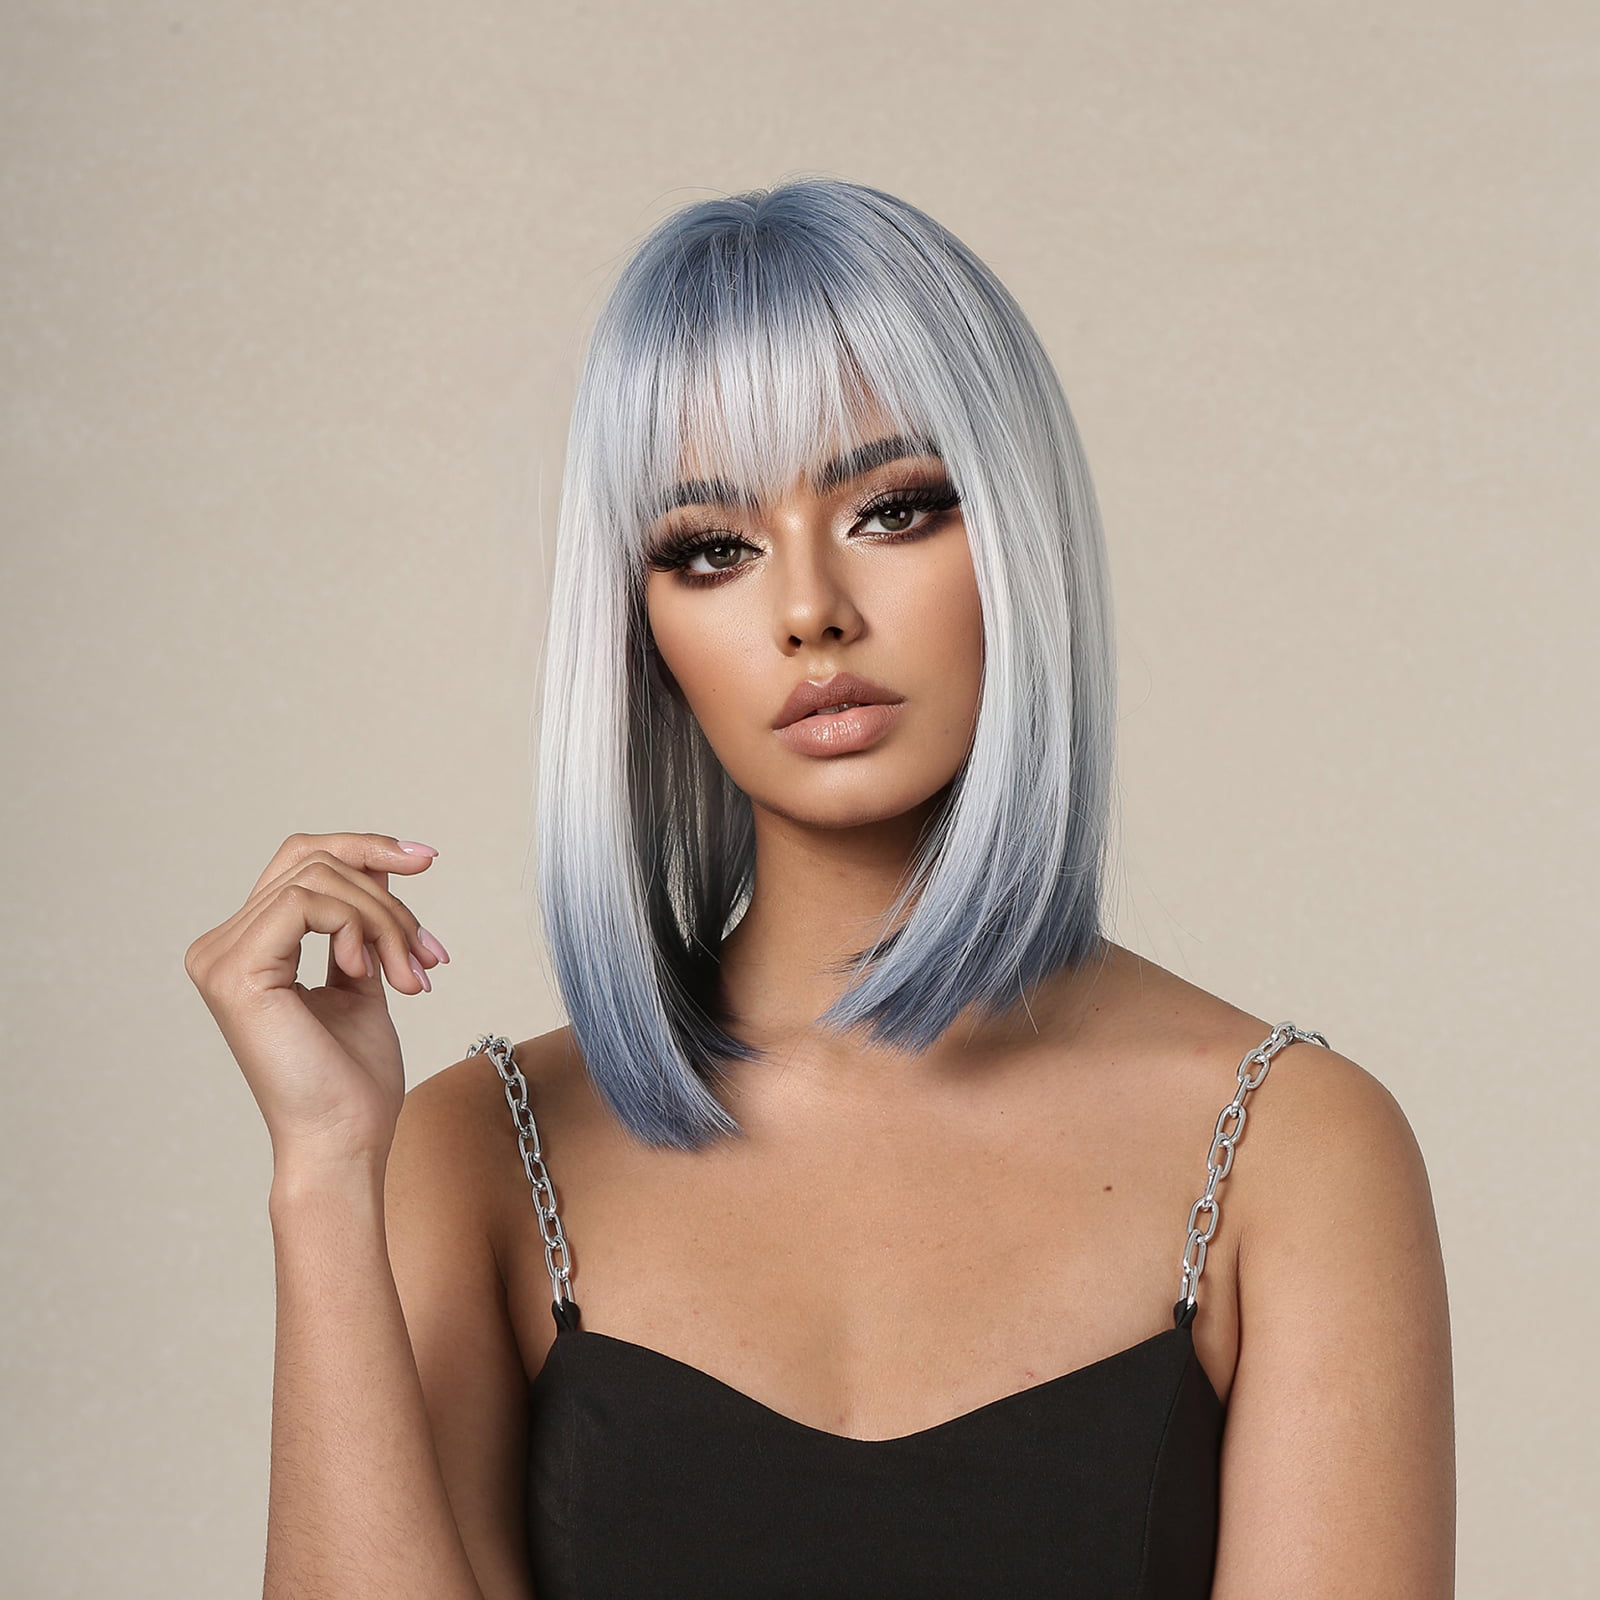 Image of a synthetic wig in silver brown with short straight hair, perfect for quick styling and ready to go